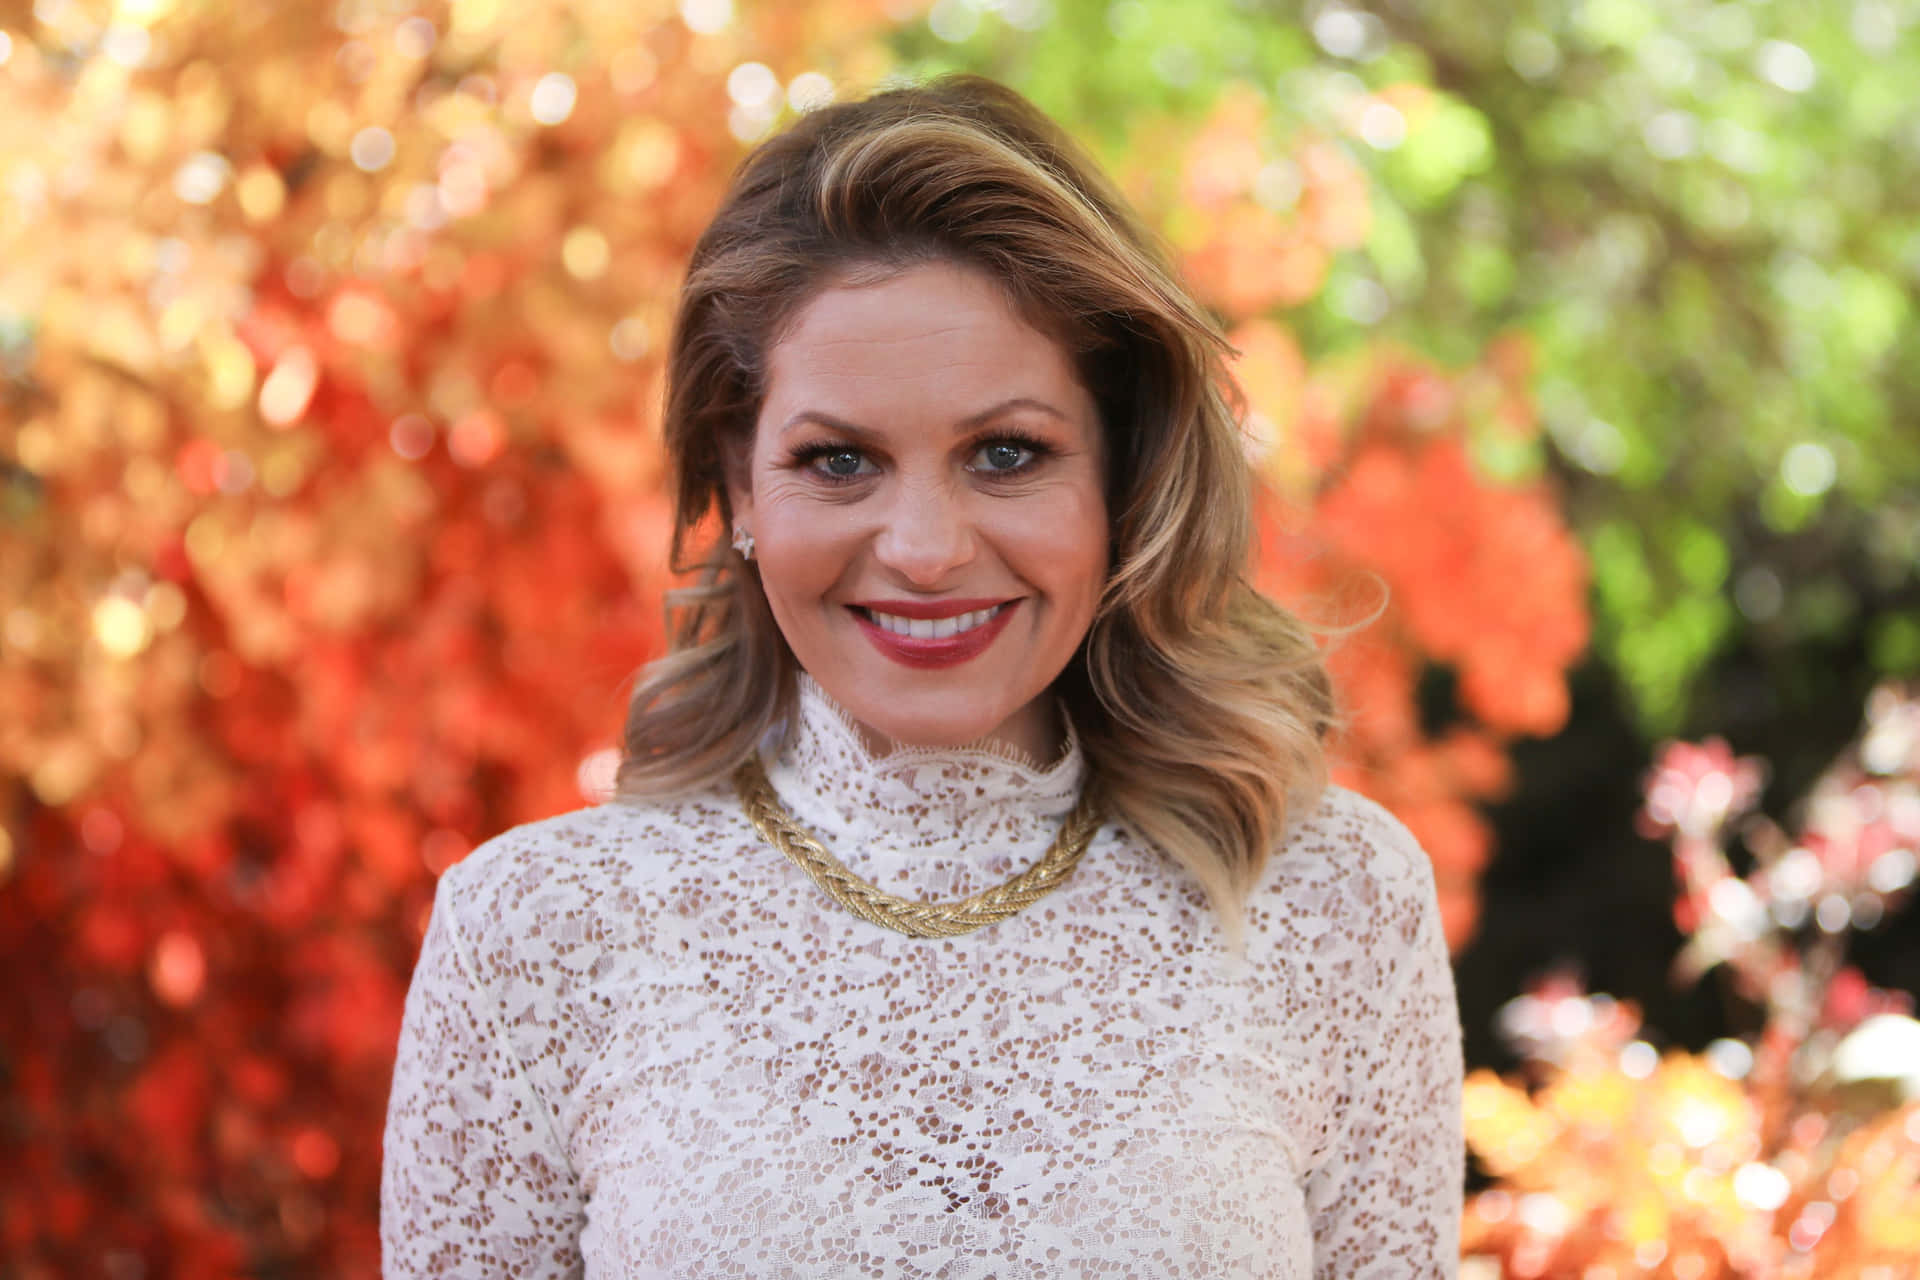 Candace Cameron Bure On A Red Carpet Event Background